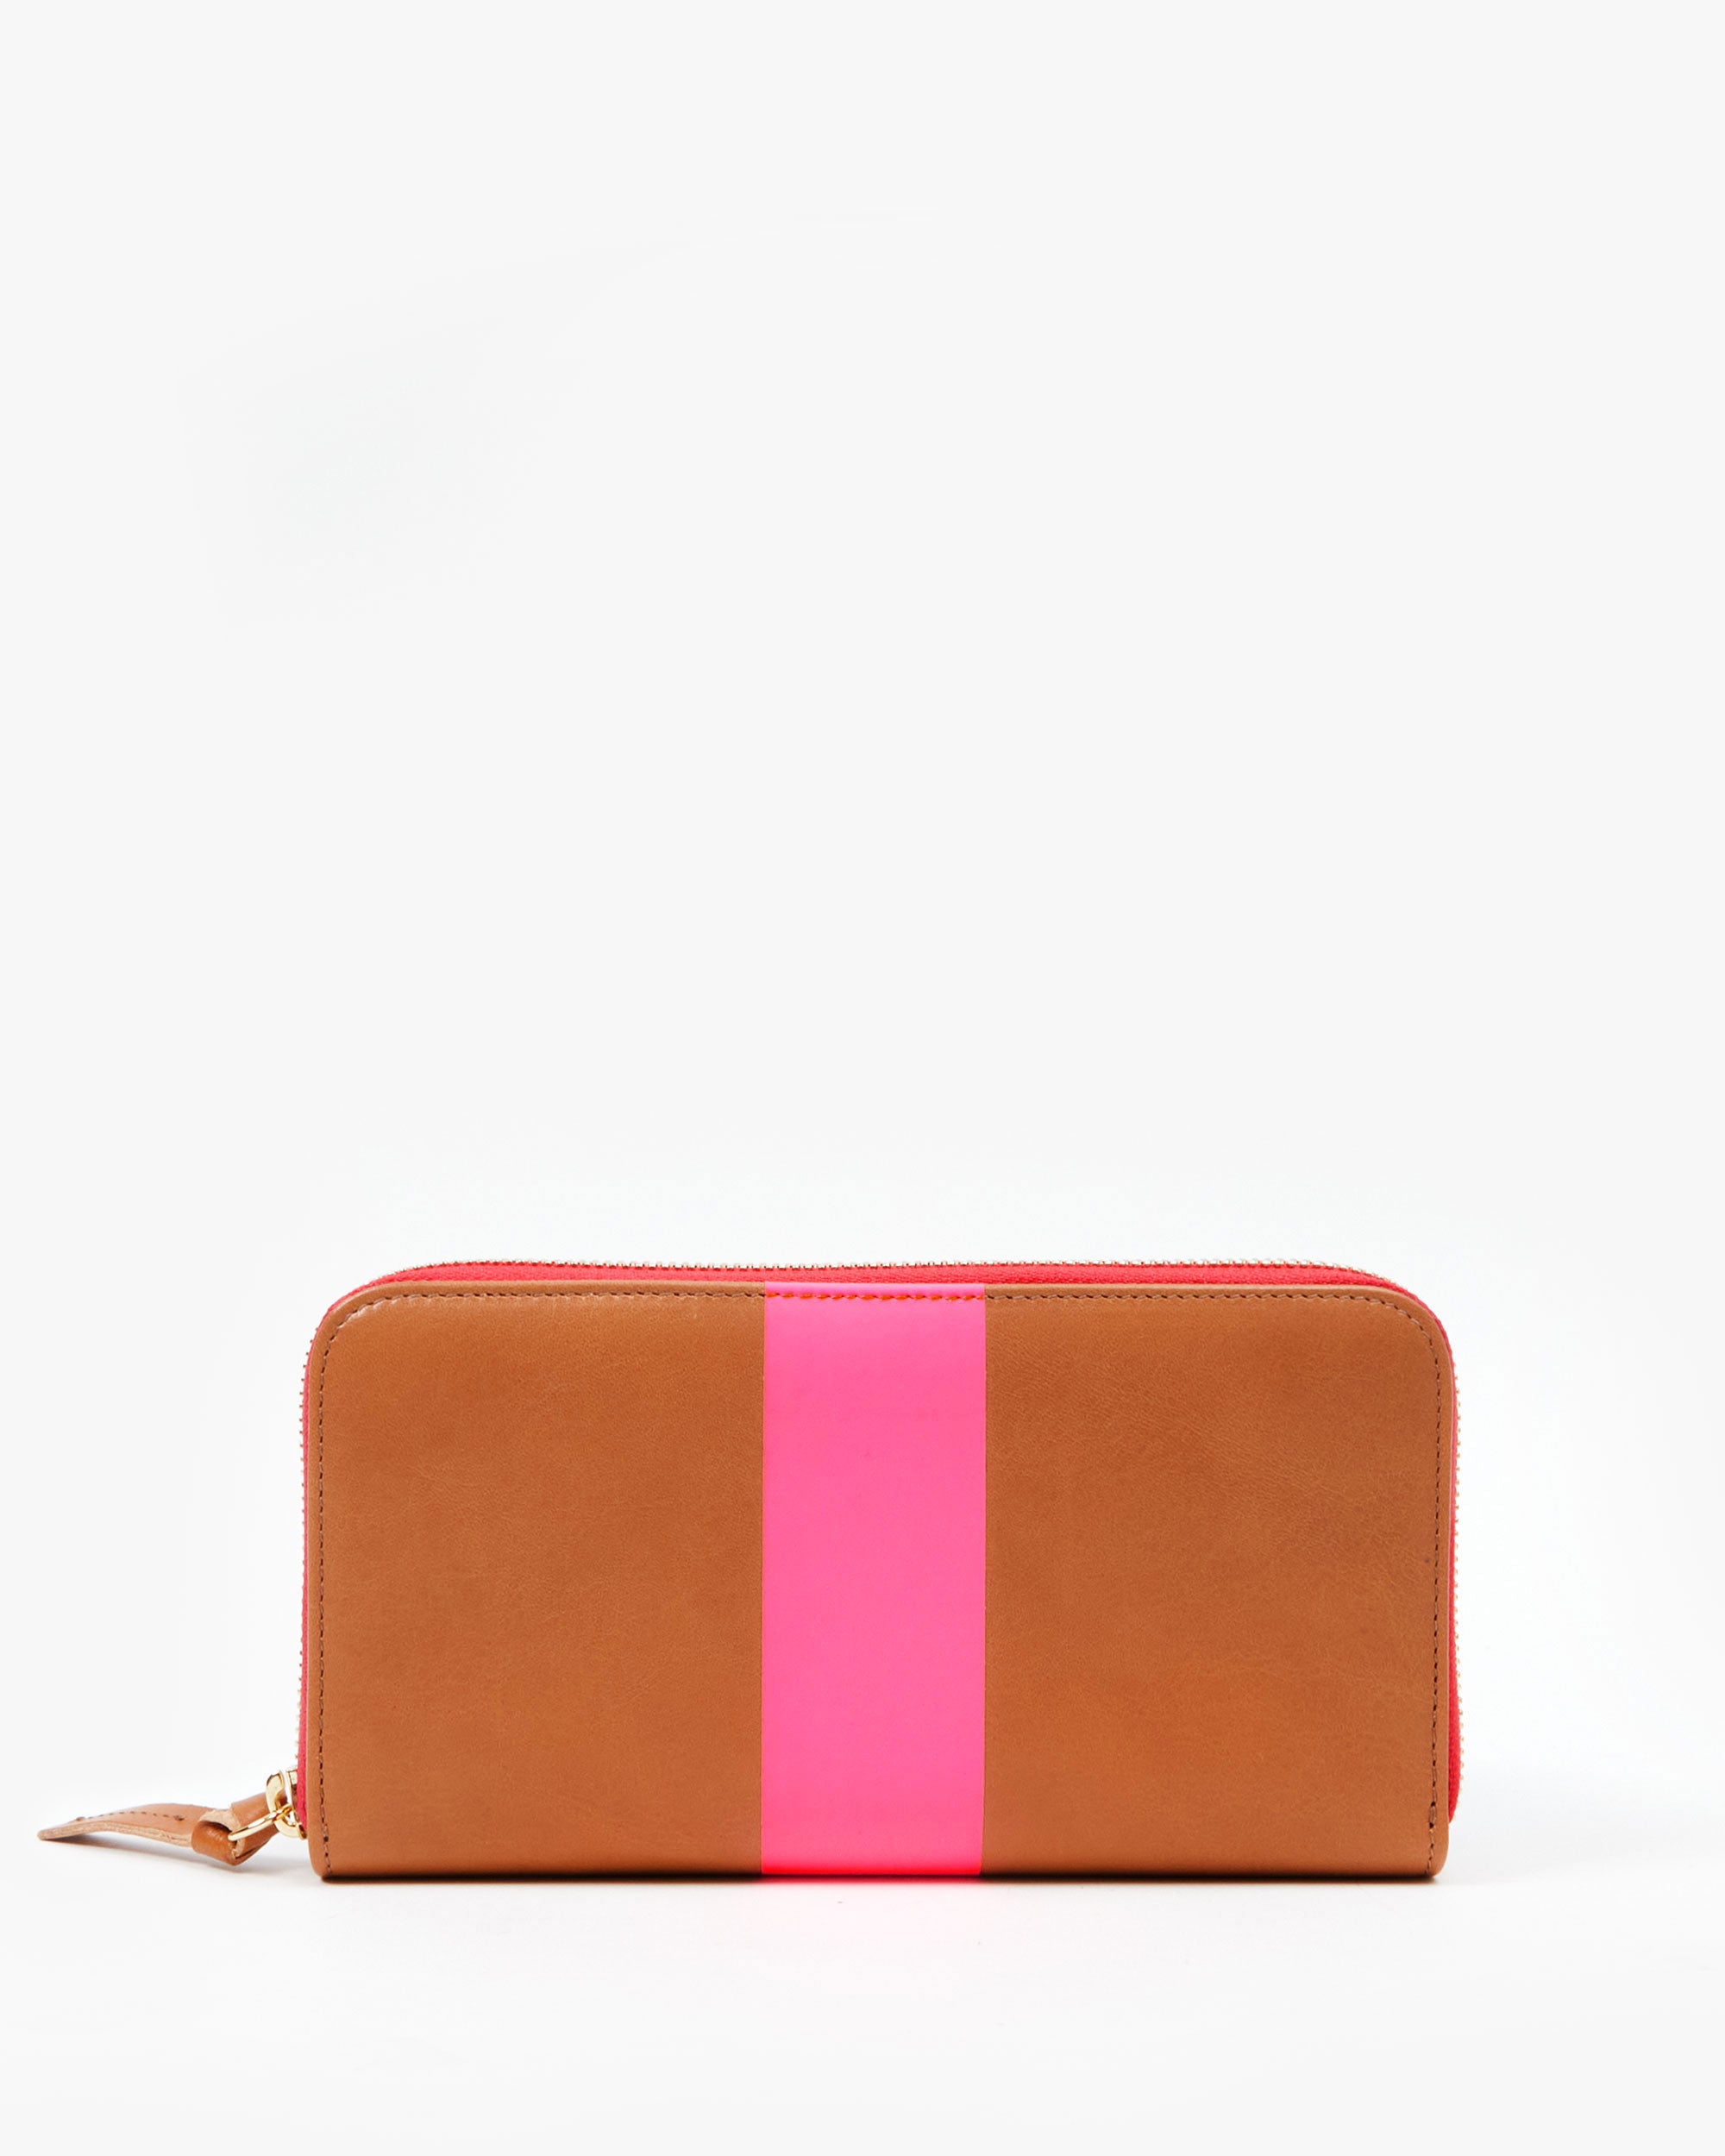 Clare V. chit chat. Matilde with the Neon Pink Le Zip Sac